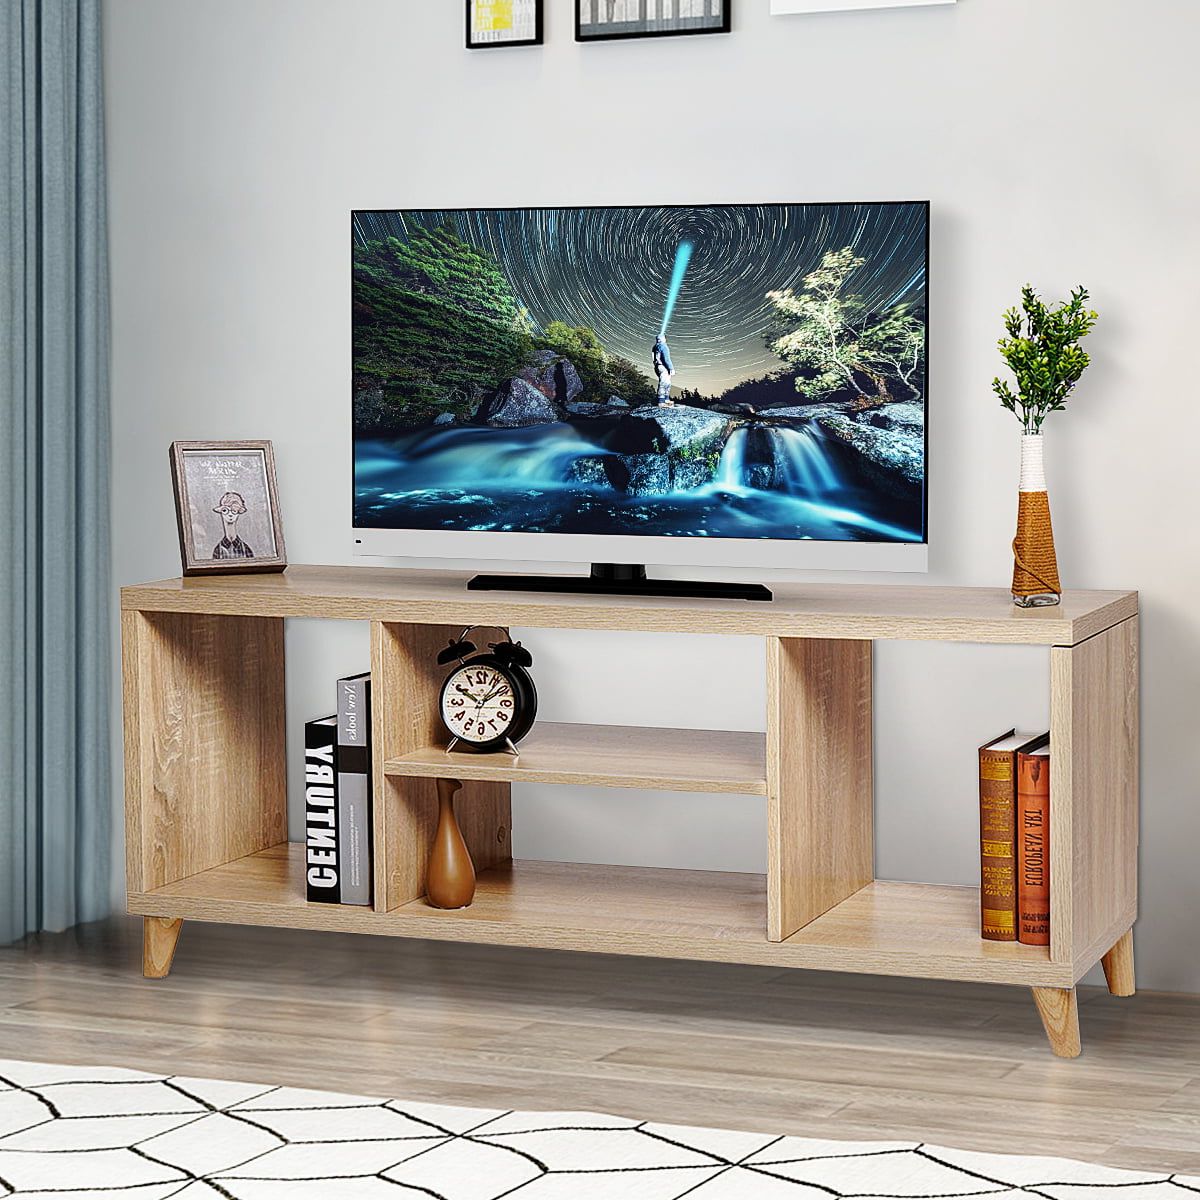 Widely Used Modern Stands With Shelves In Modern Tv Stand For Tvs 40'' To 45'' W/4 Open Shelves Storage, Tv (View 3 of 15)